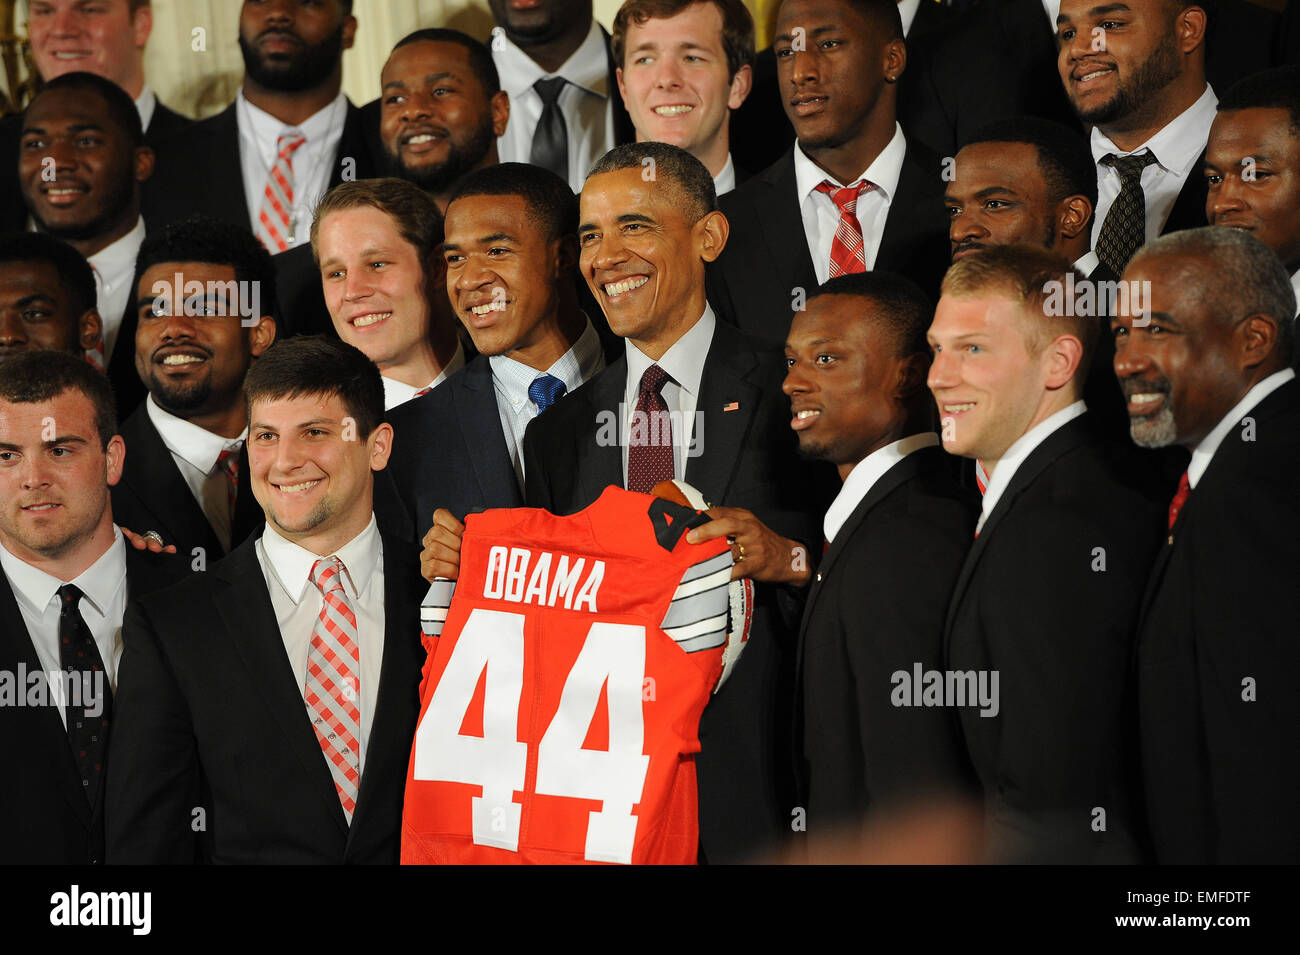 Washington, District Of Columbia, USA. 20th Apr, 2015. PRESIDENT OBAMA is given an Ohio State football jersey by The Ohio State University Buckeyes football team in honor of the team on winning the first ever College Football Playoff National Championship The event took place in the East Room of the White House Credit:  Ricky Fitchett/ZUMA Wire/Alamy Live News Stock Photo